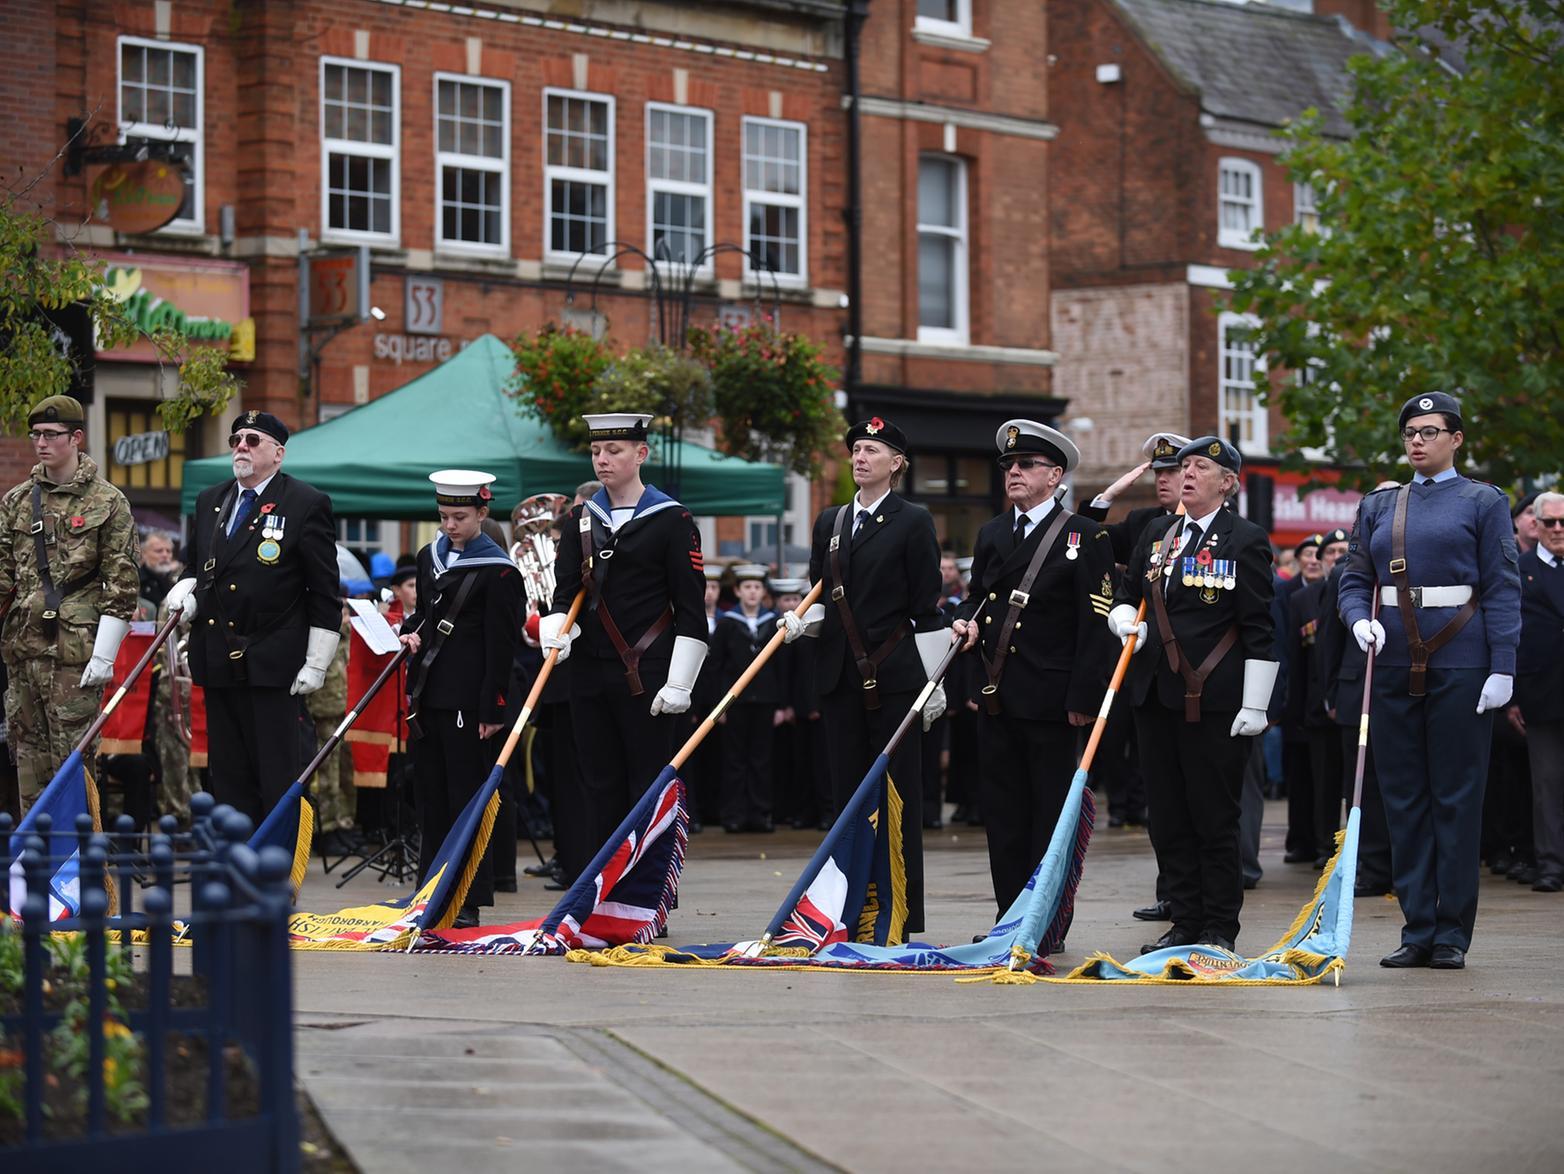 Standard bearers on the Square.